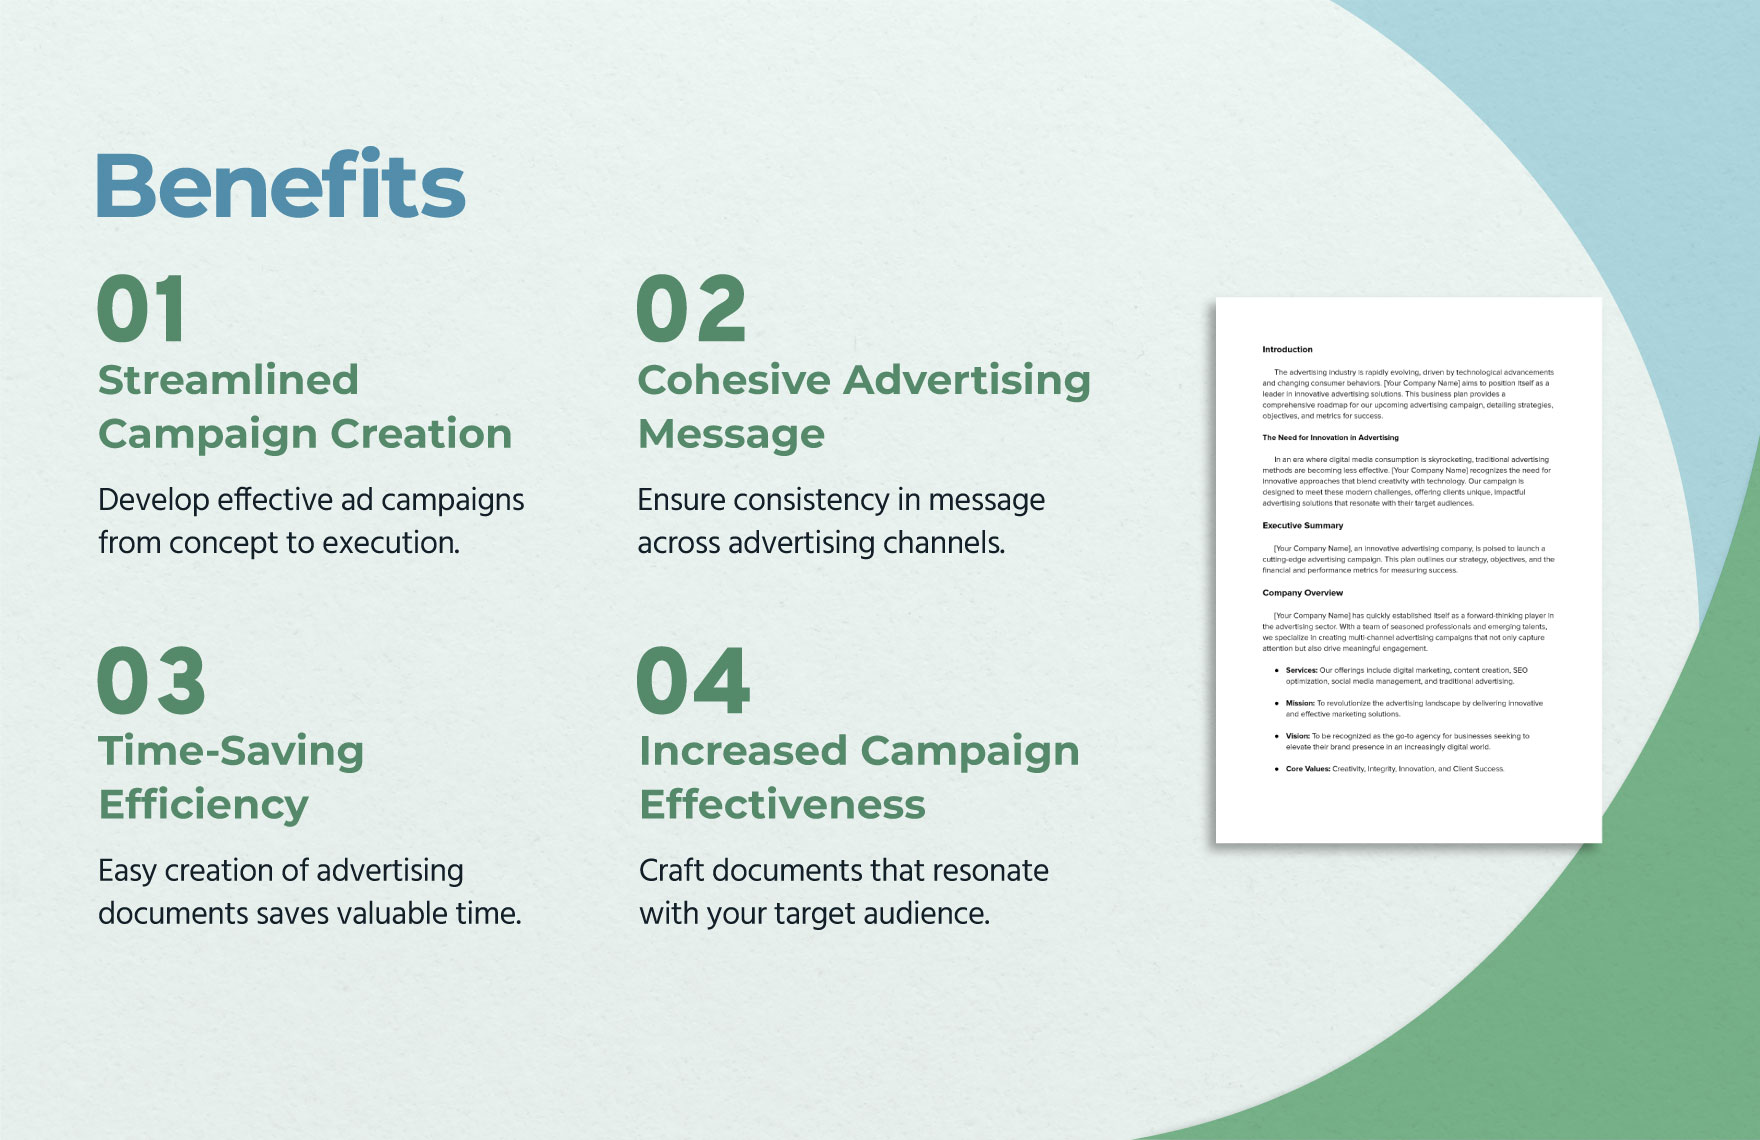 Advertising Comprehensive Business Plan for Campaign Template